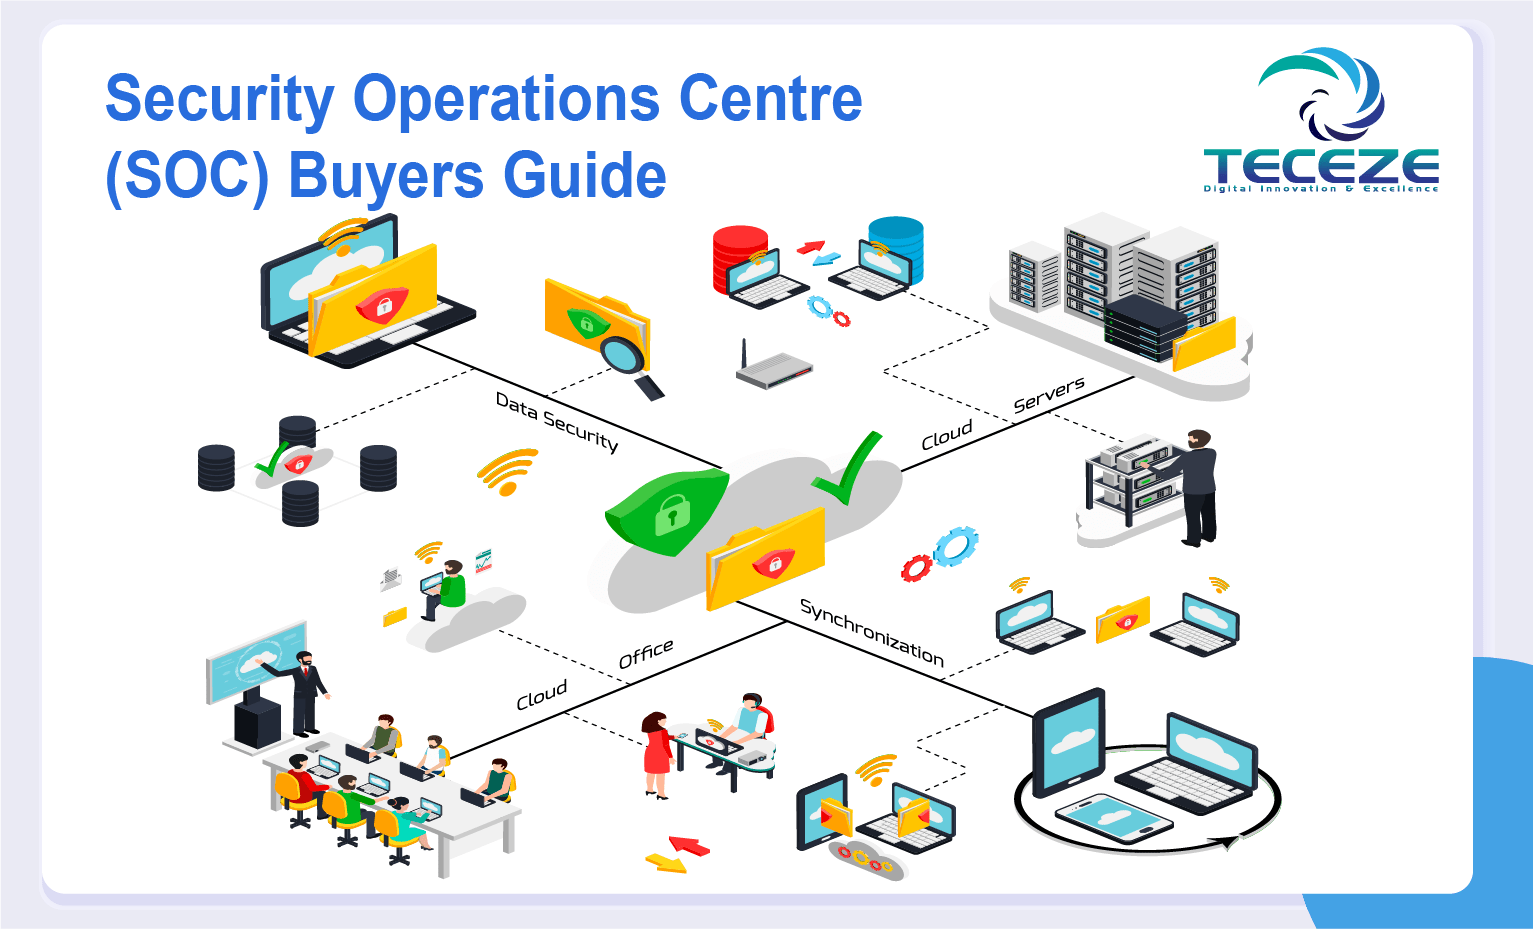 Security Operations Centre (SOC) Buyers Guide Managed IT Services and